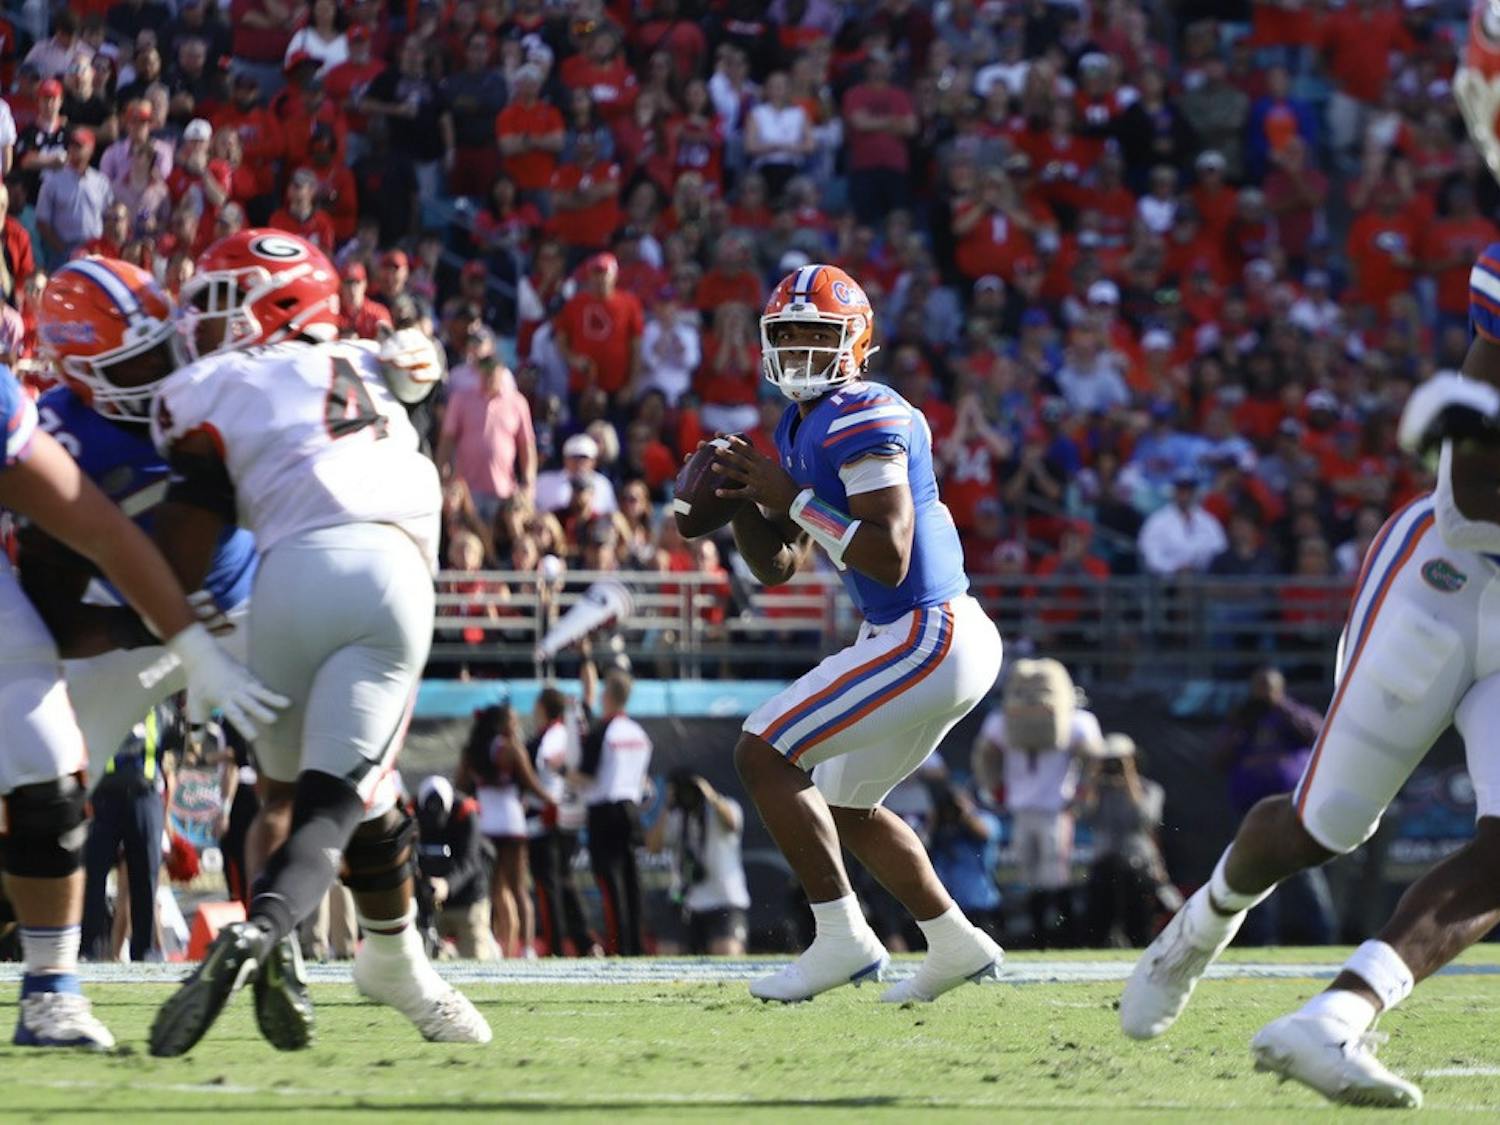 Florida quarterback Anthony Richardson drops back to pass during his first start against No. 1 Georgia during a 34-7 on Oct. 30.